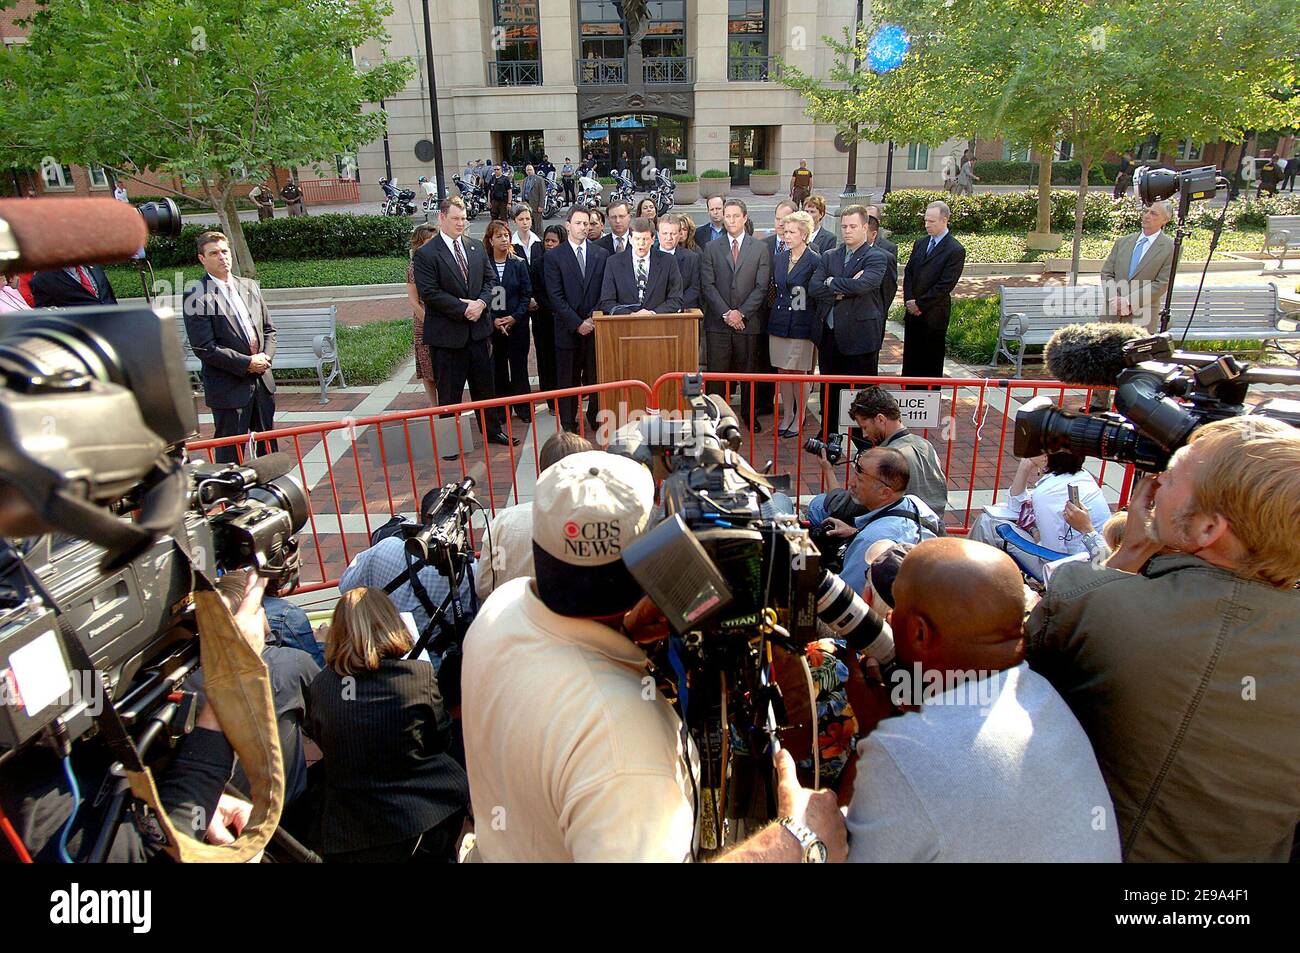 Assistant U.S. District Attorney Paul McNulty (C) leads the U.S. government's prosecution team from the Federal Court of Alexandria after the announcement of the verdict in the sentencing phase of the trial of Al-Qaeda conspirator Zacarias Moussaoui for his role in the September 11 attacks outside Federal Court May 3, 2006 in Alexandria, Virginia. The jury found that Moussaoui should spend his life in prison rather than face the death sentence for his role in the attacks. Photo by Olivier Douliery/ABACAPRESS.COM Stock Photo